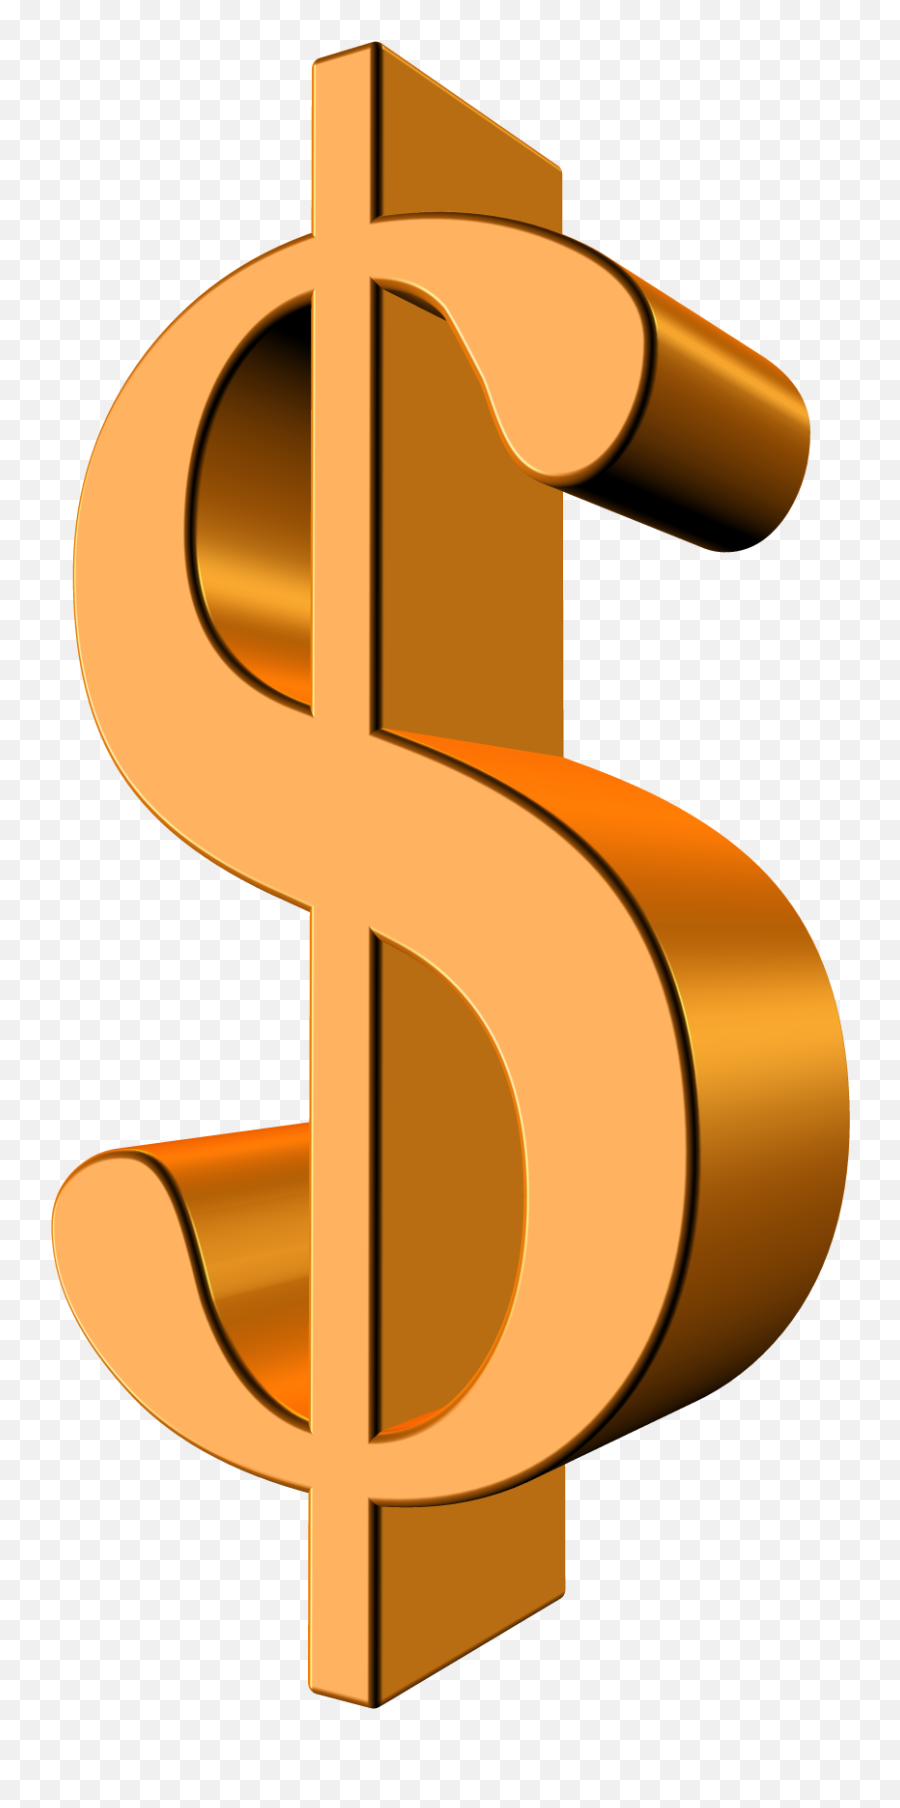 Clipart Of Dollar Sign Free Image Emoji,Dollar Sign Clipart